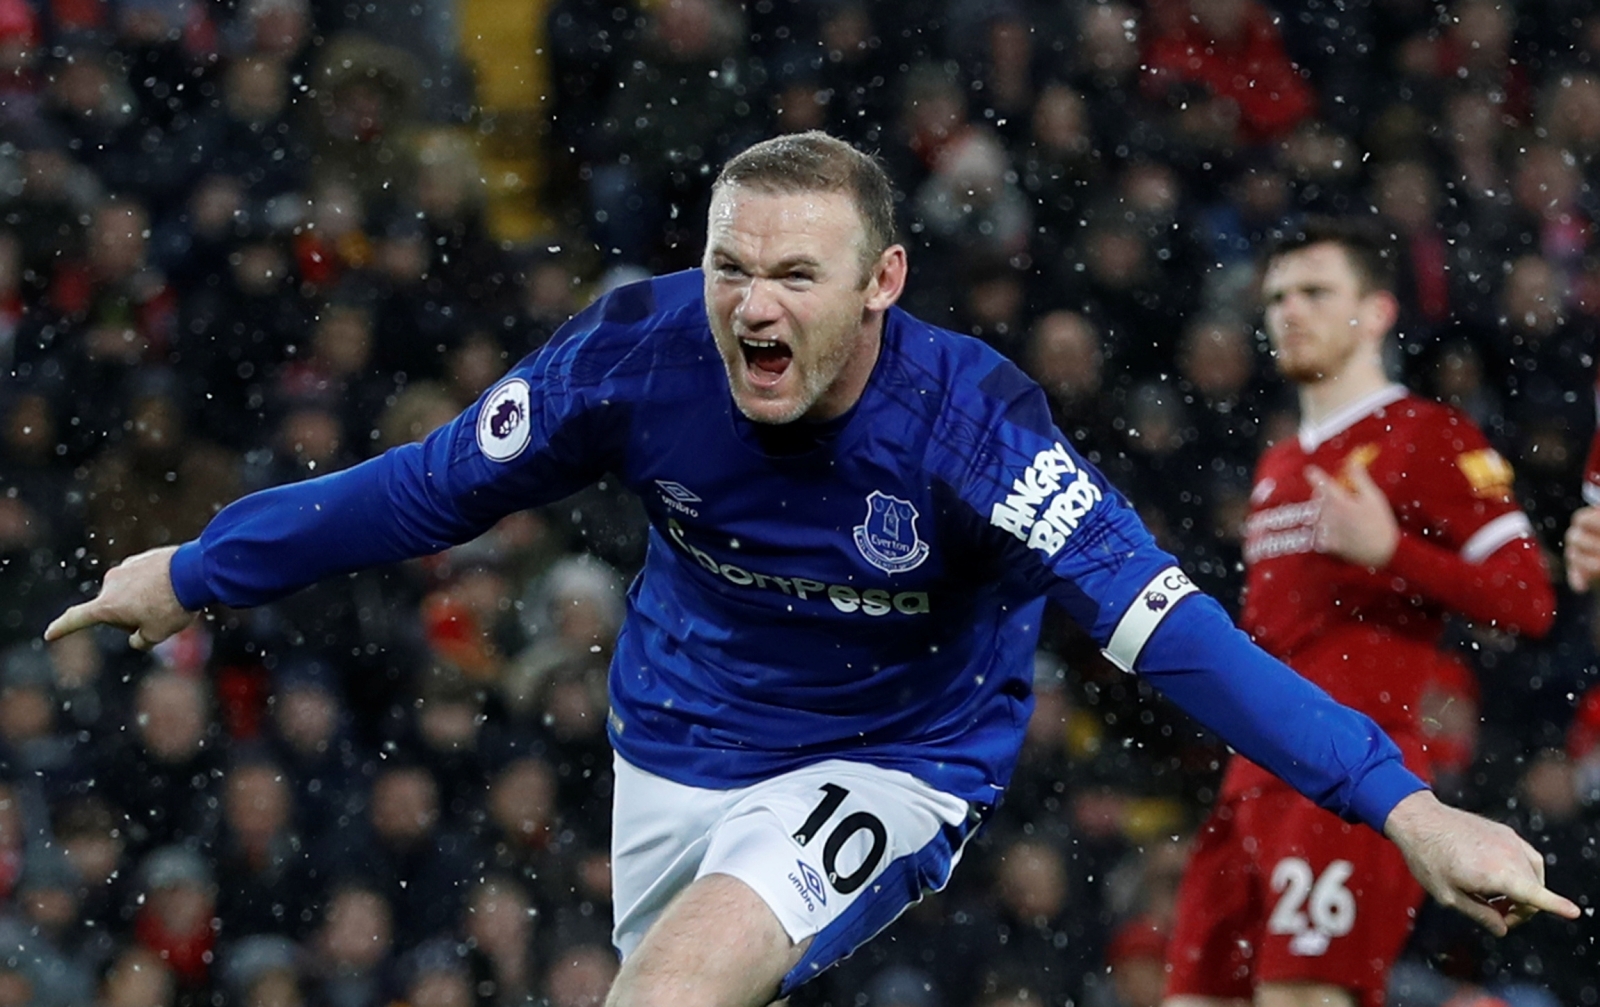 Liverpool 1-1 Everton: Rooney's penalty punishes Lovren gaffe as Blues